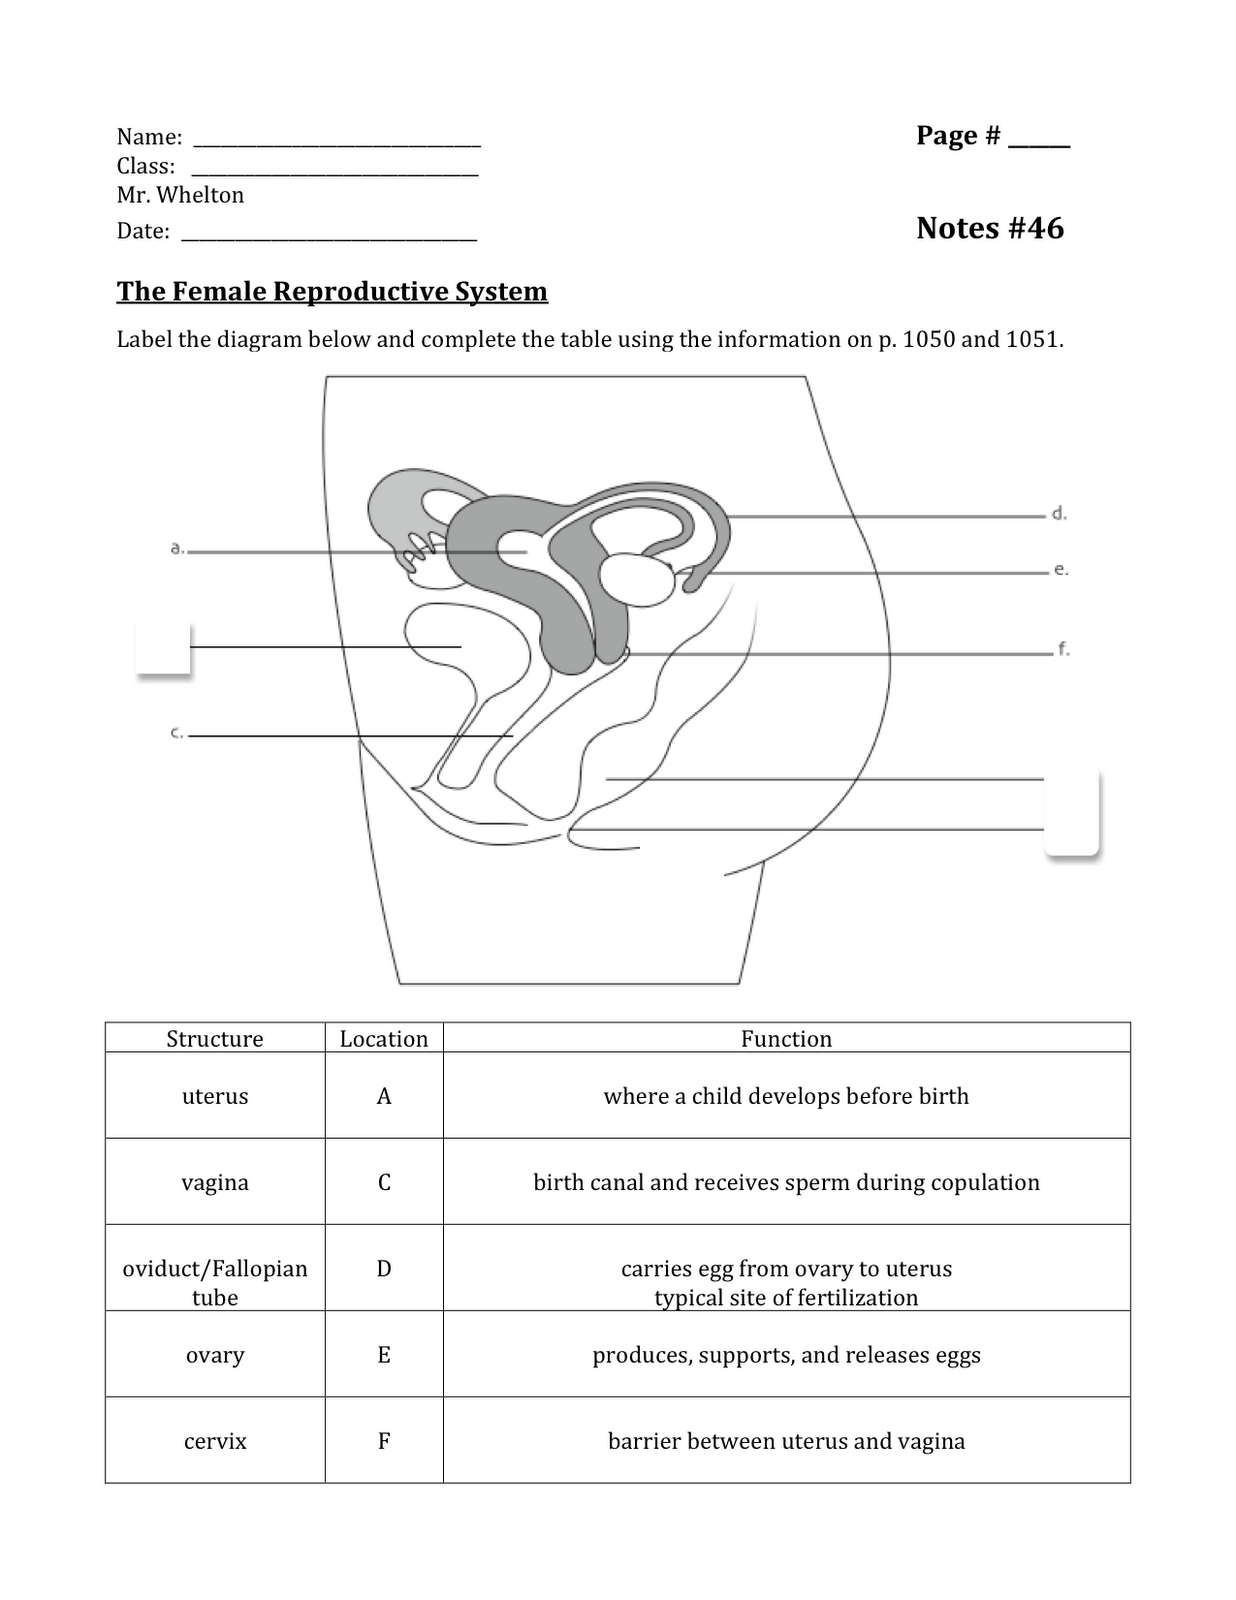 Notes 46 - Female Reproductive System | School of the Future 11th Grade